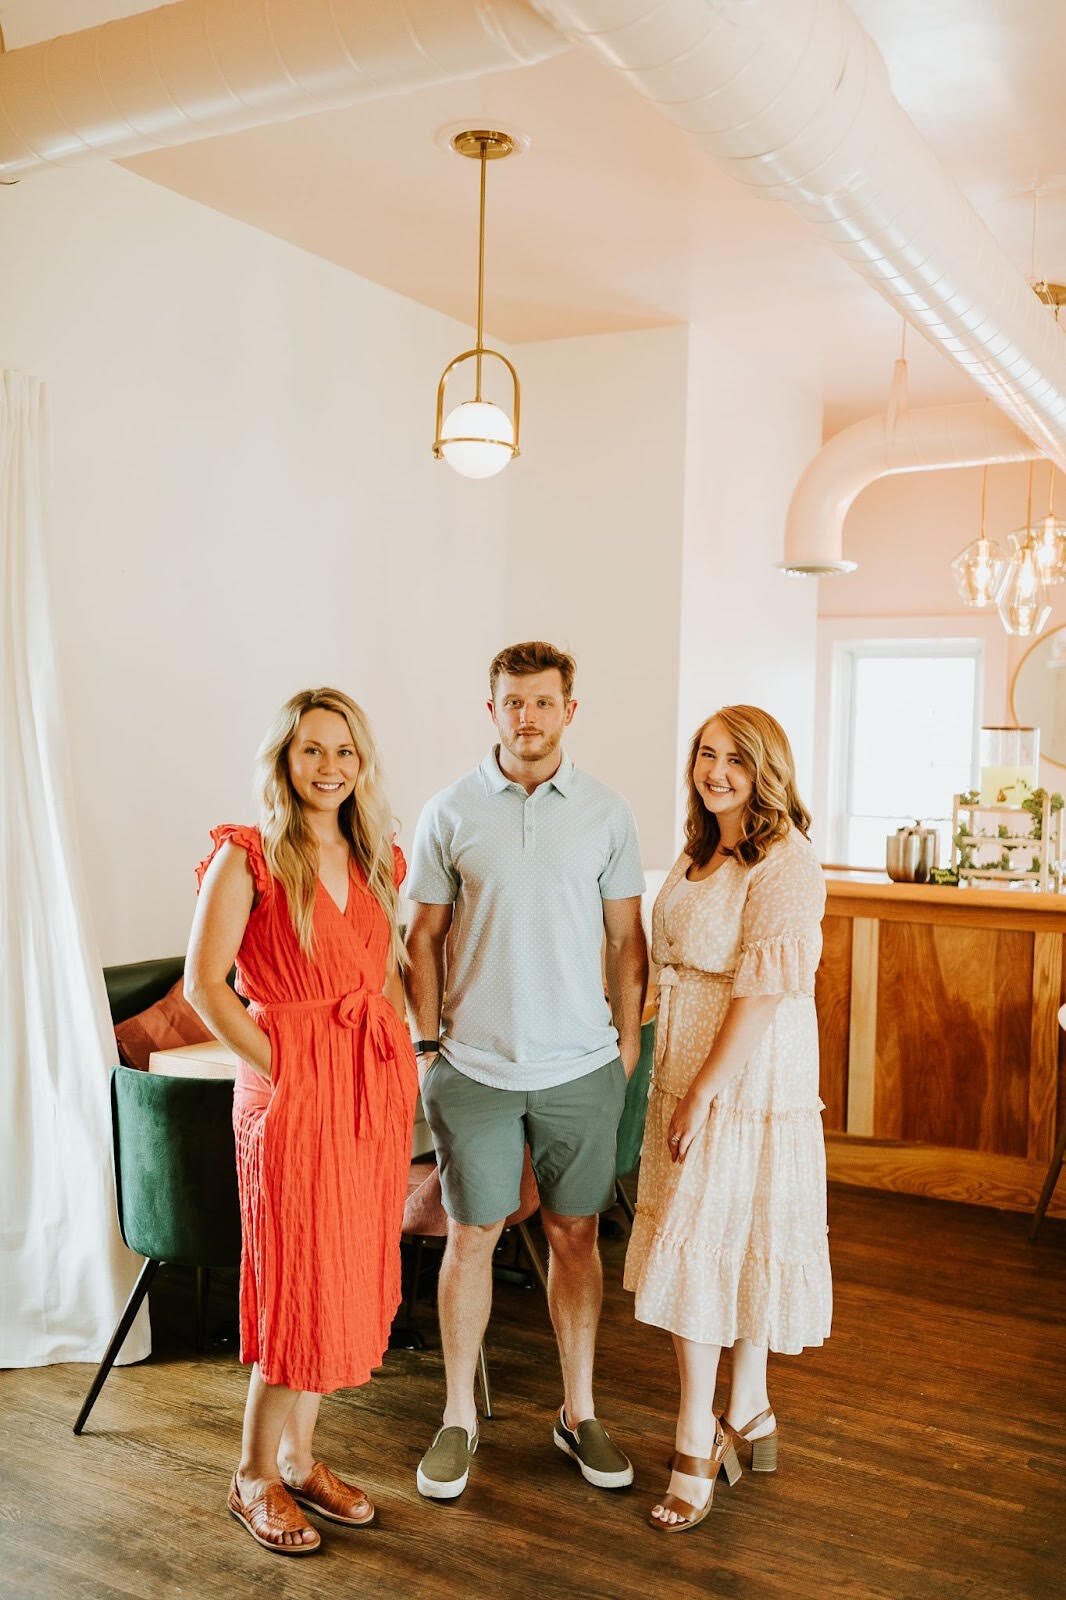 Ophelia's owners are, from left, the married couple, Paige and Taylor Tiernon, and their friend, Brittany Pape.